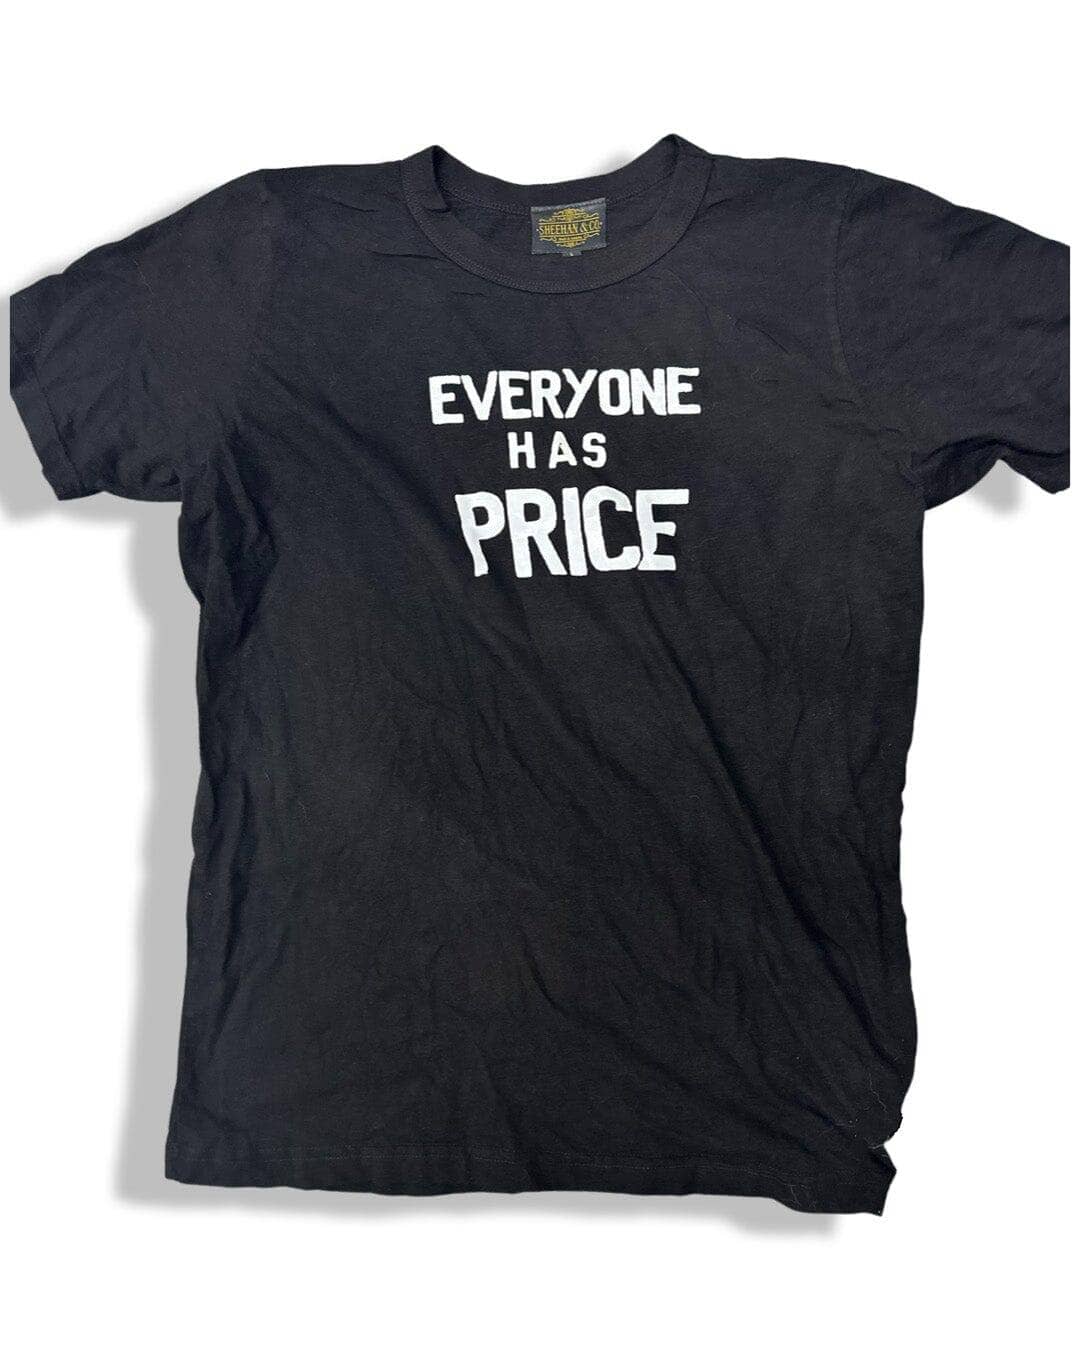 Everyone Has A Price Statement Tee by Sheehan - Sheehan and Co.